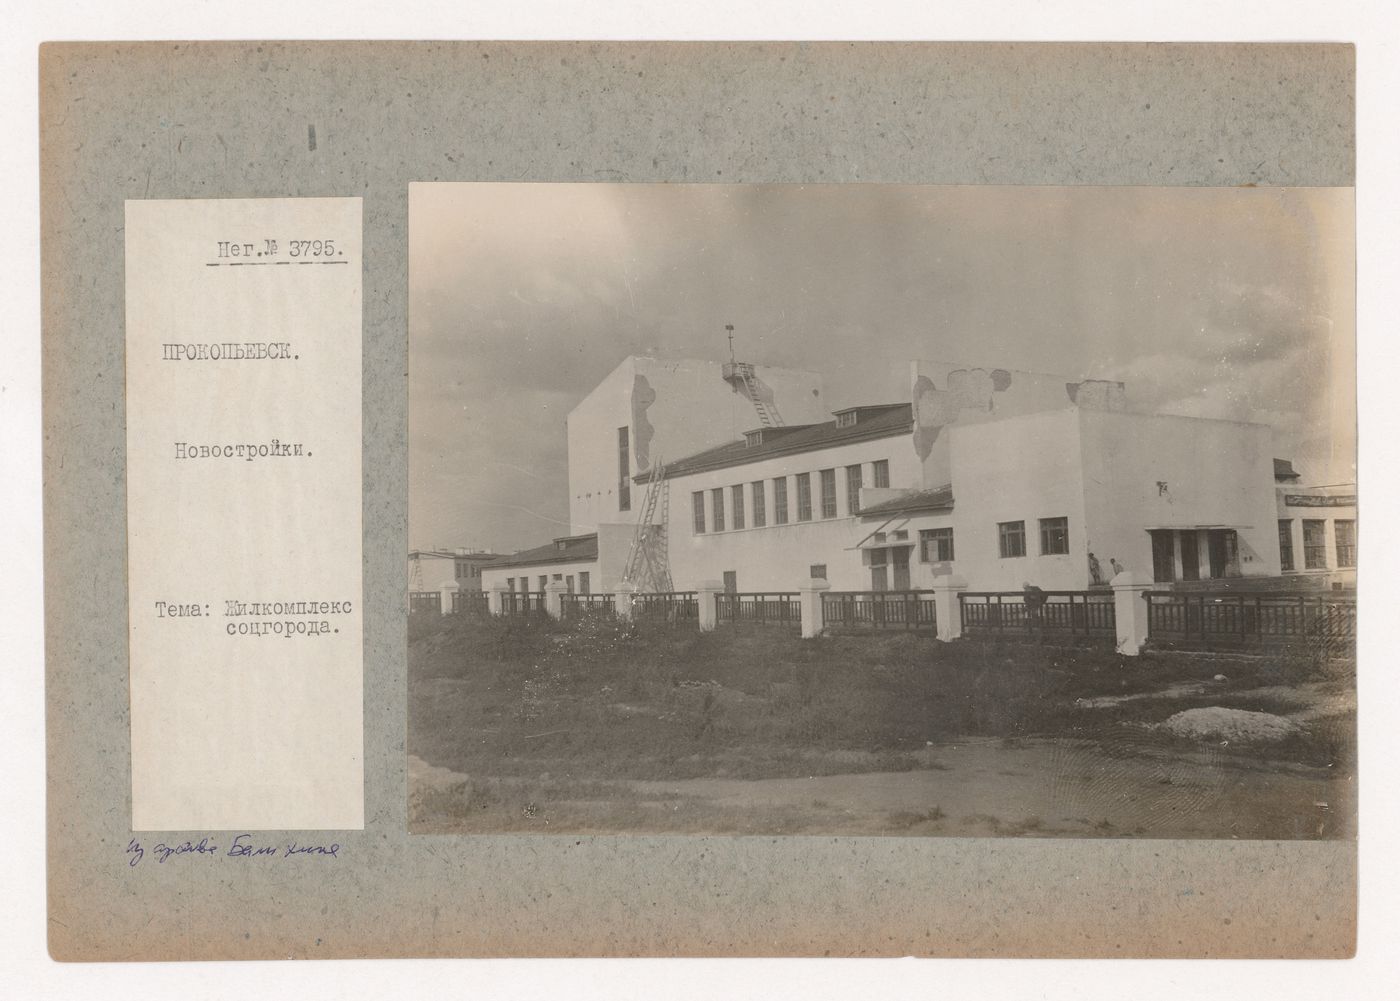 View of a club or a palace of culture, Prokopyevsk, Soviet Union (now in Russia)